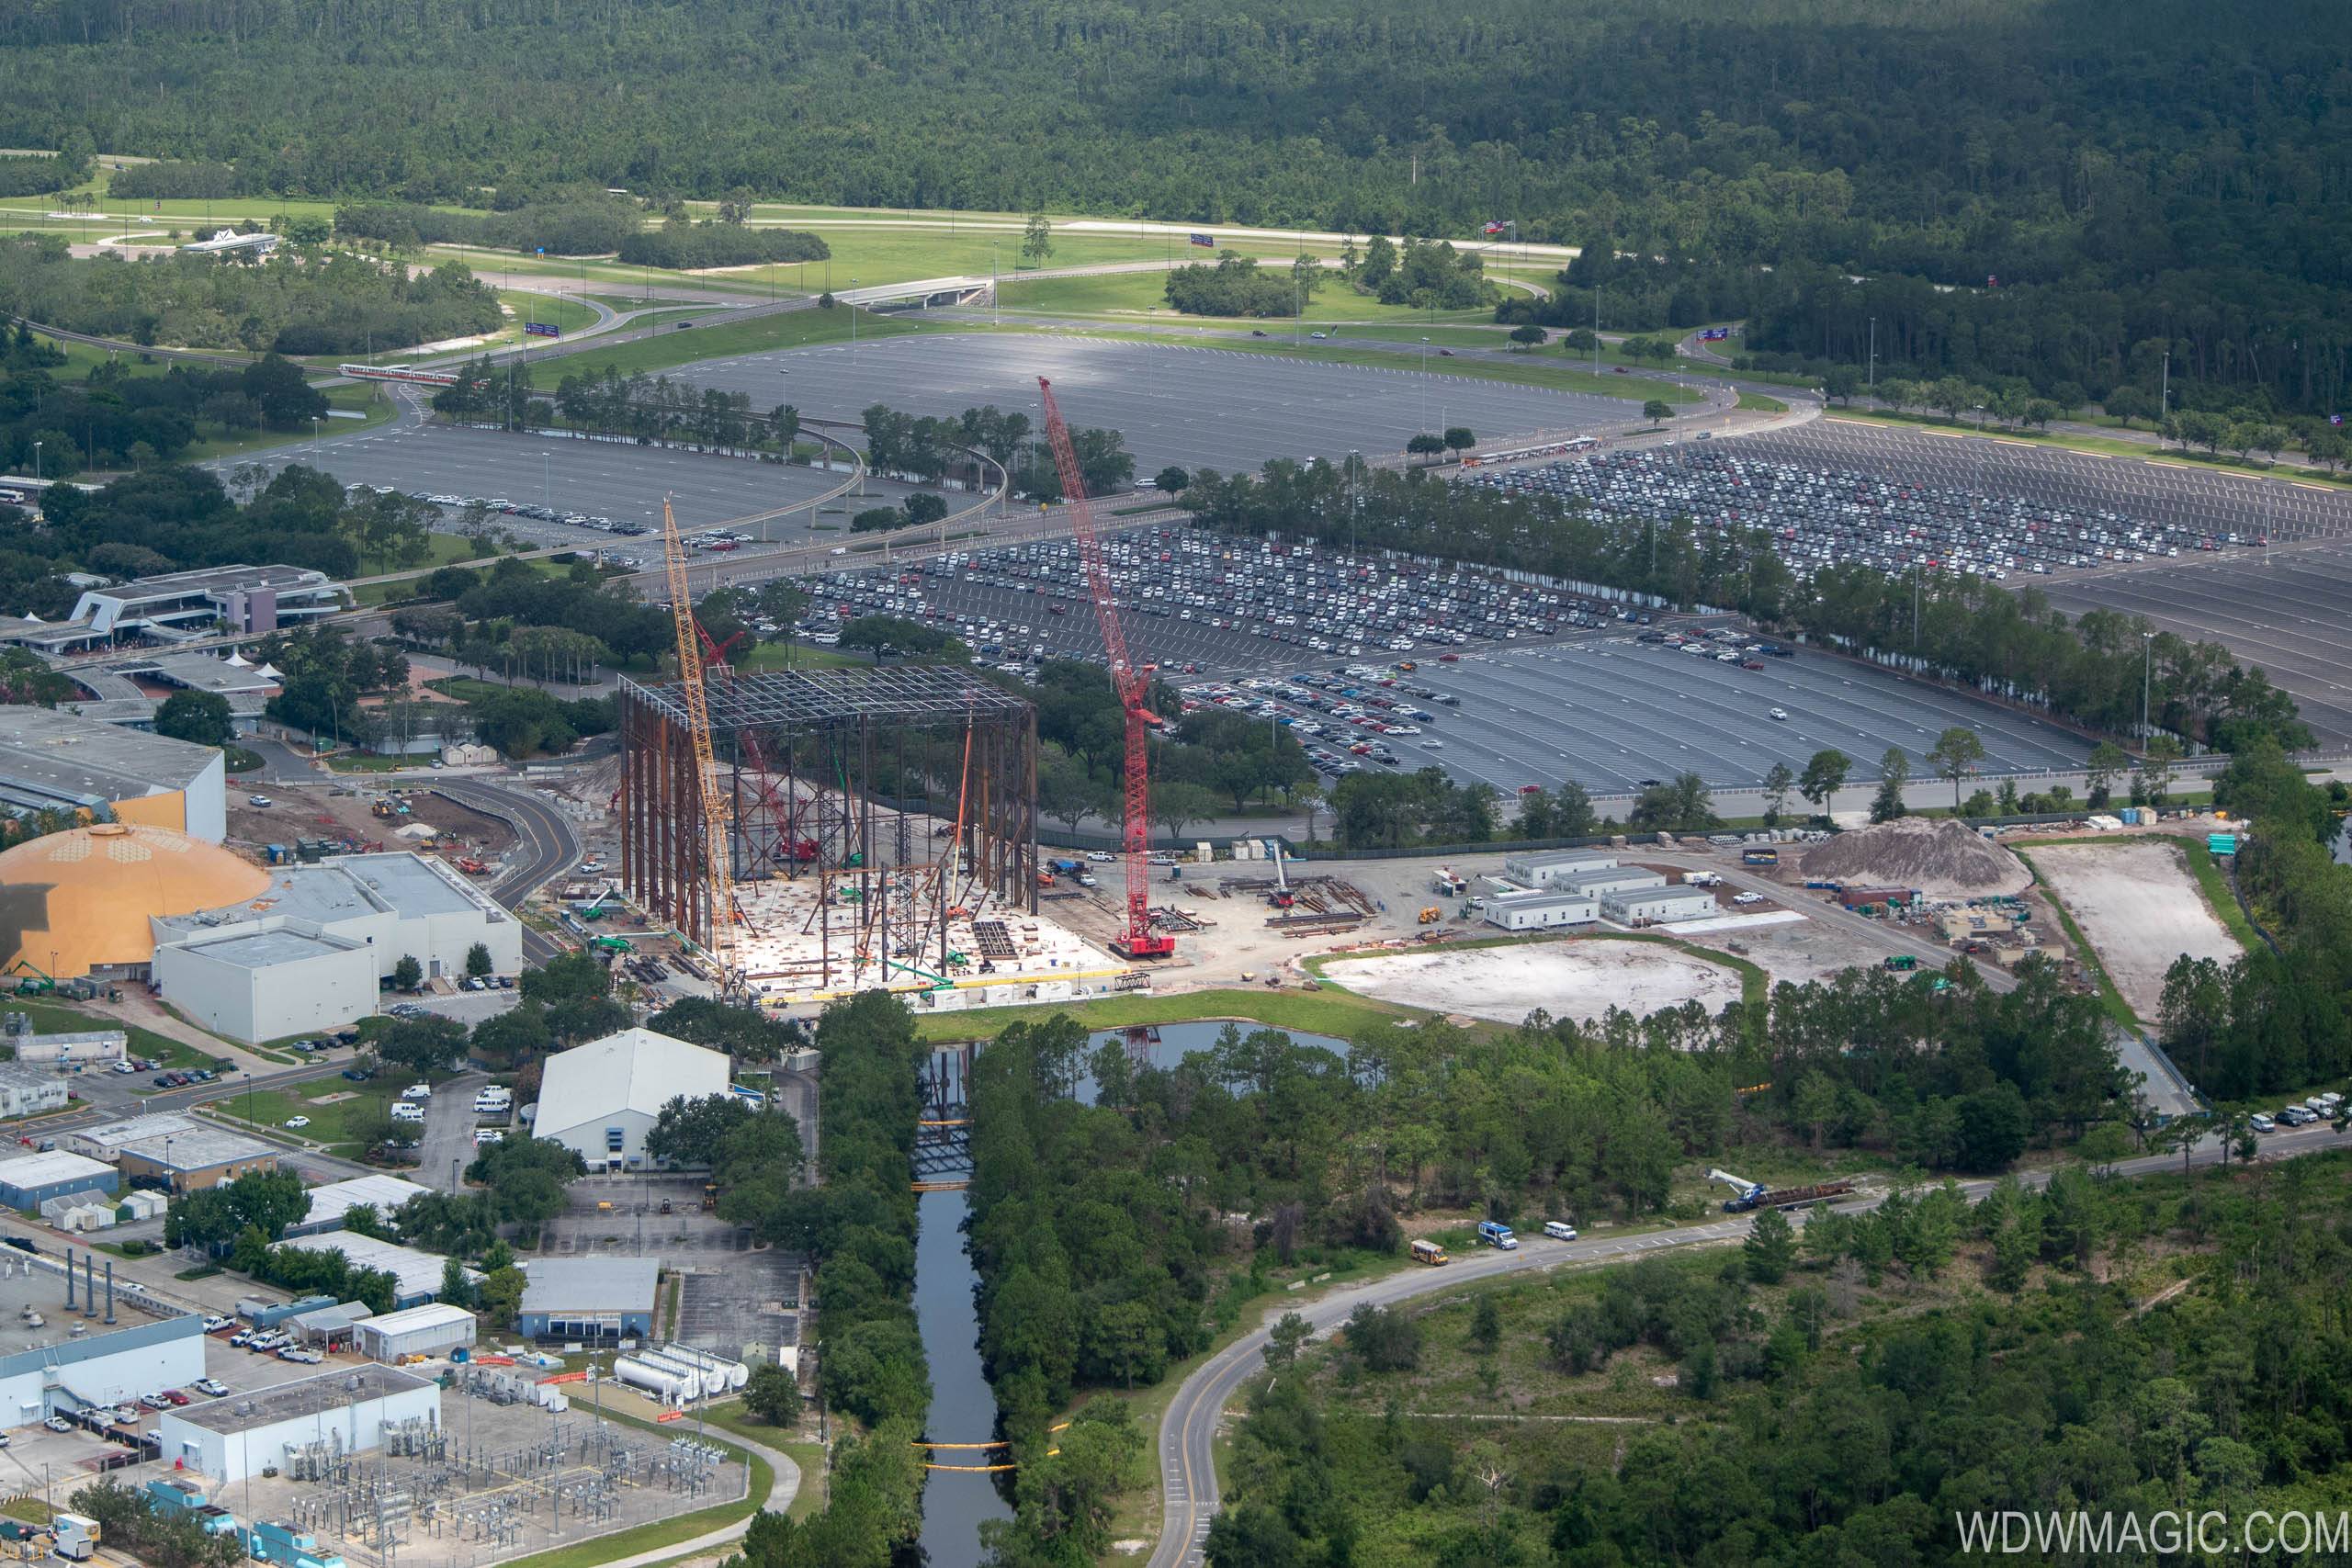 Guardians of the Galaxy construction aerial views - July 2018